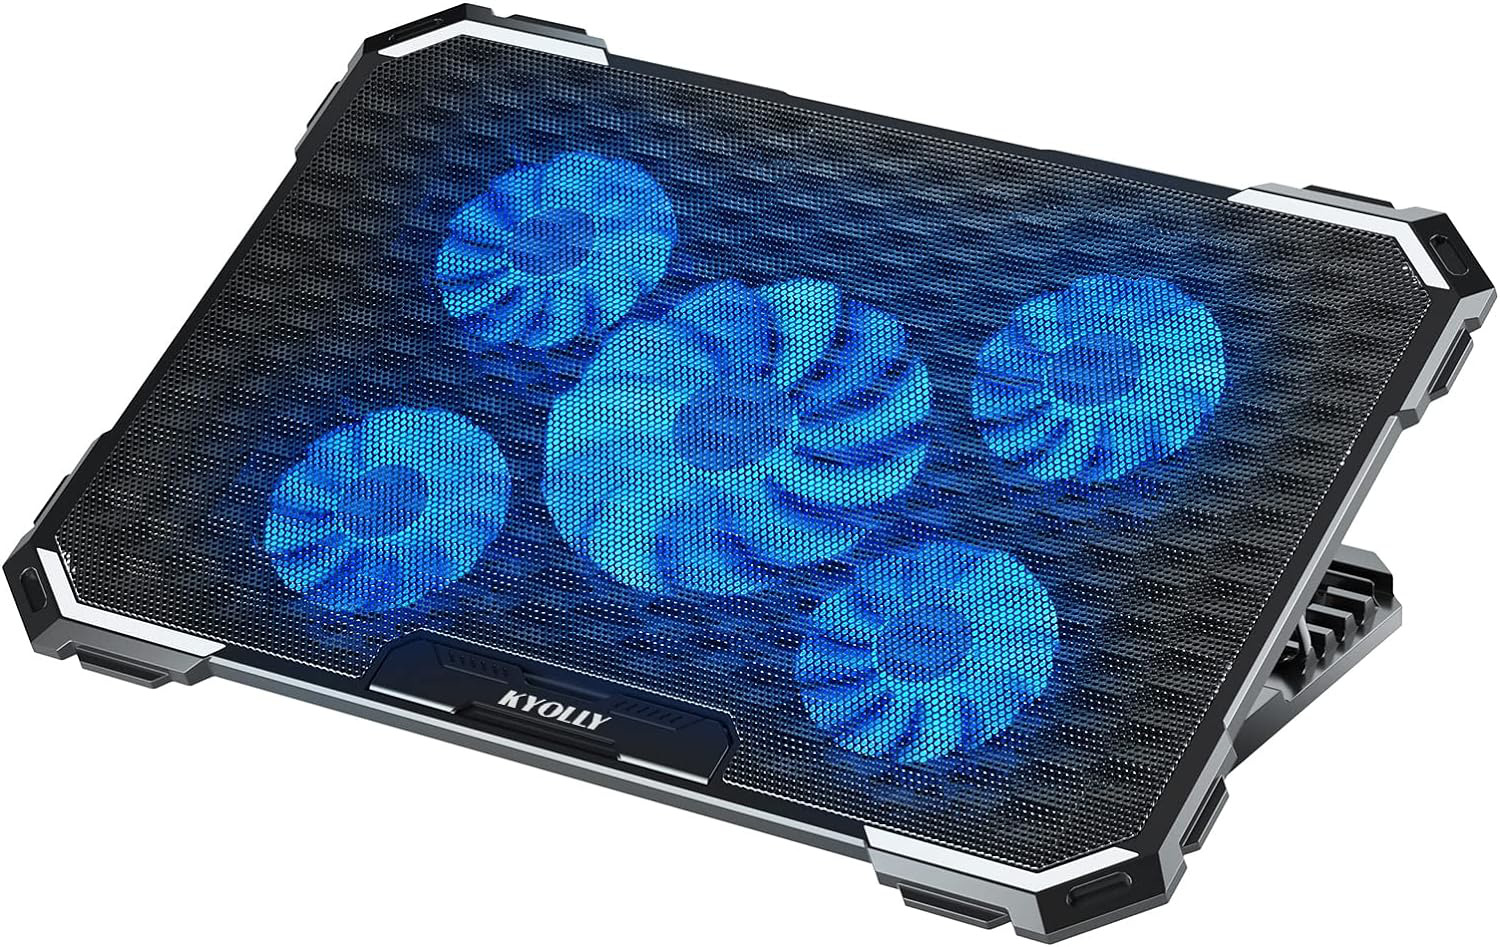 KYOLLY Upgrade Laptop Cooling Pad,Gaming Laptop Cooler with 5 Quiet Fans,2 USB 